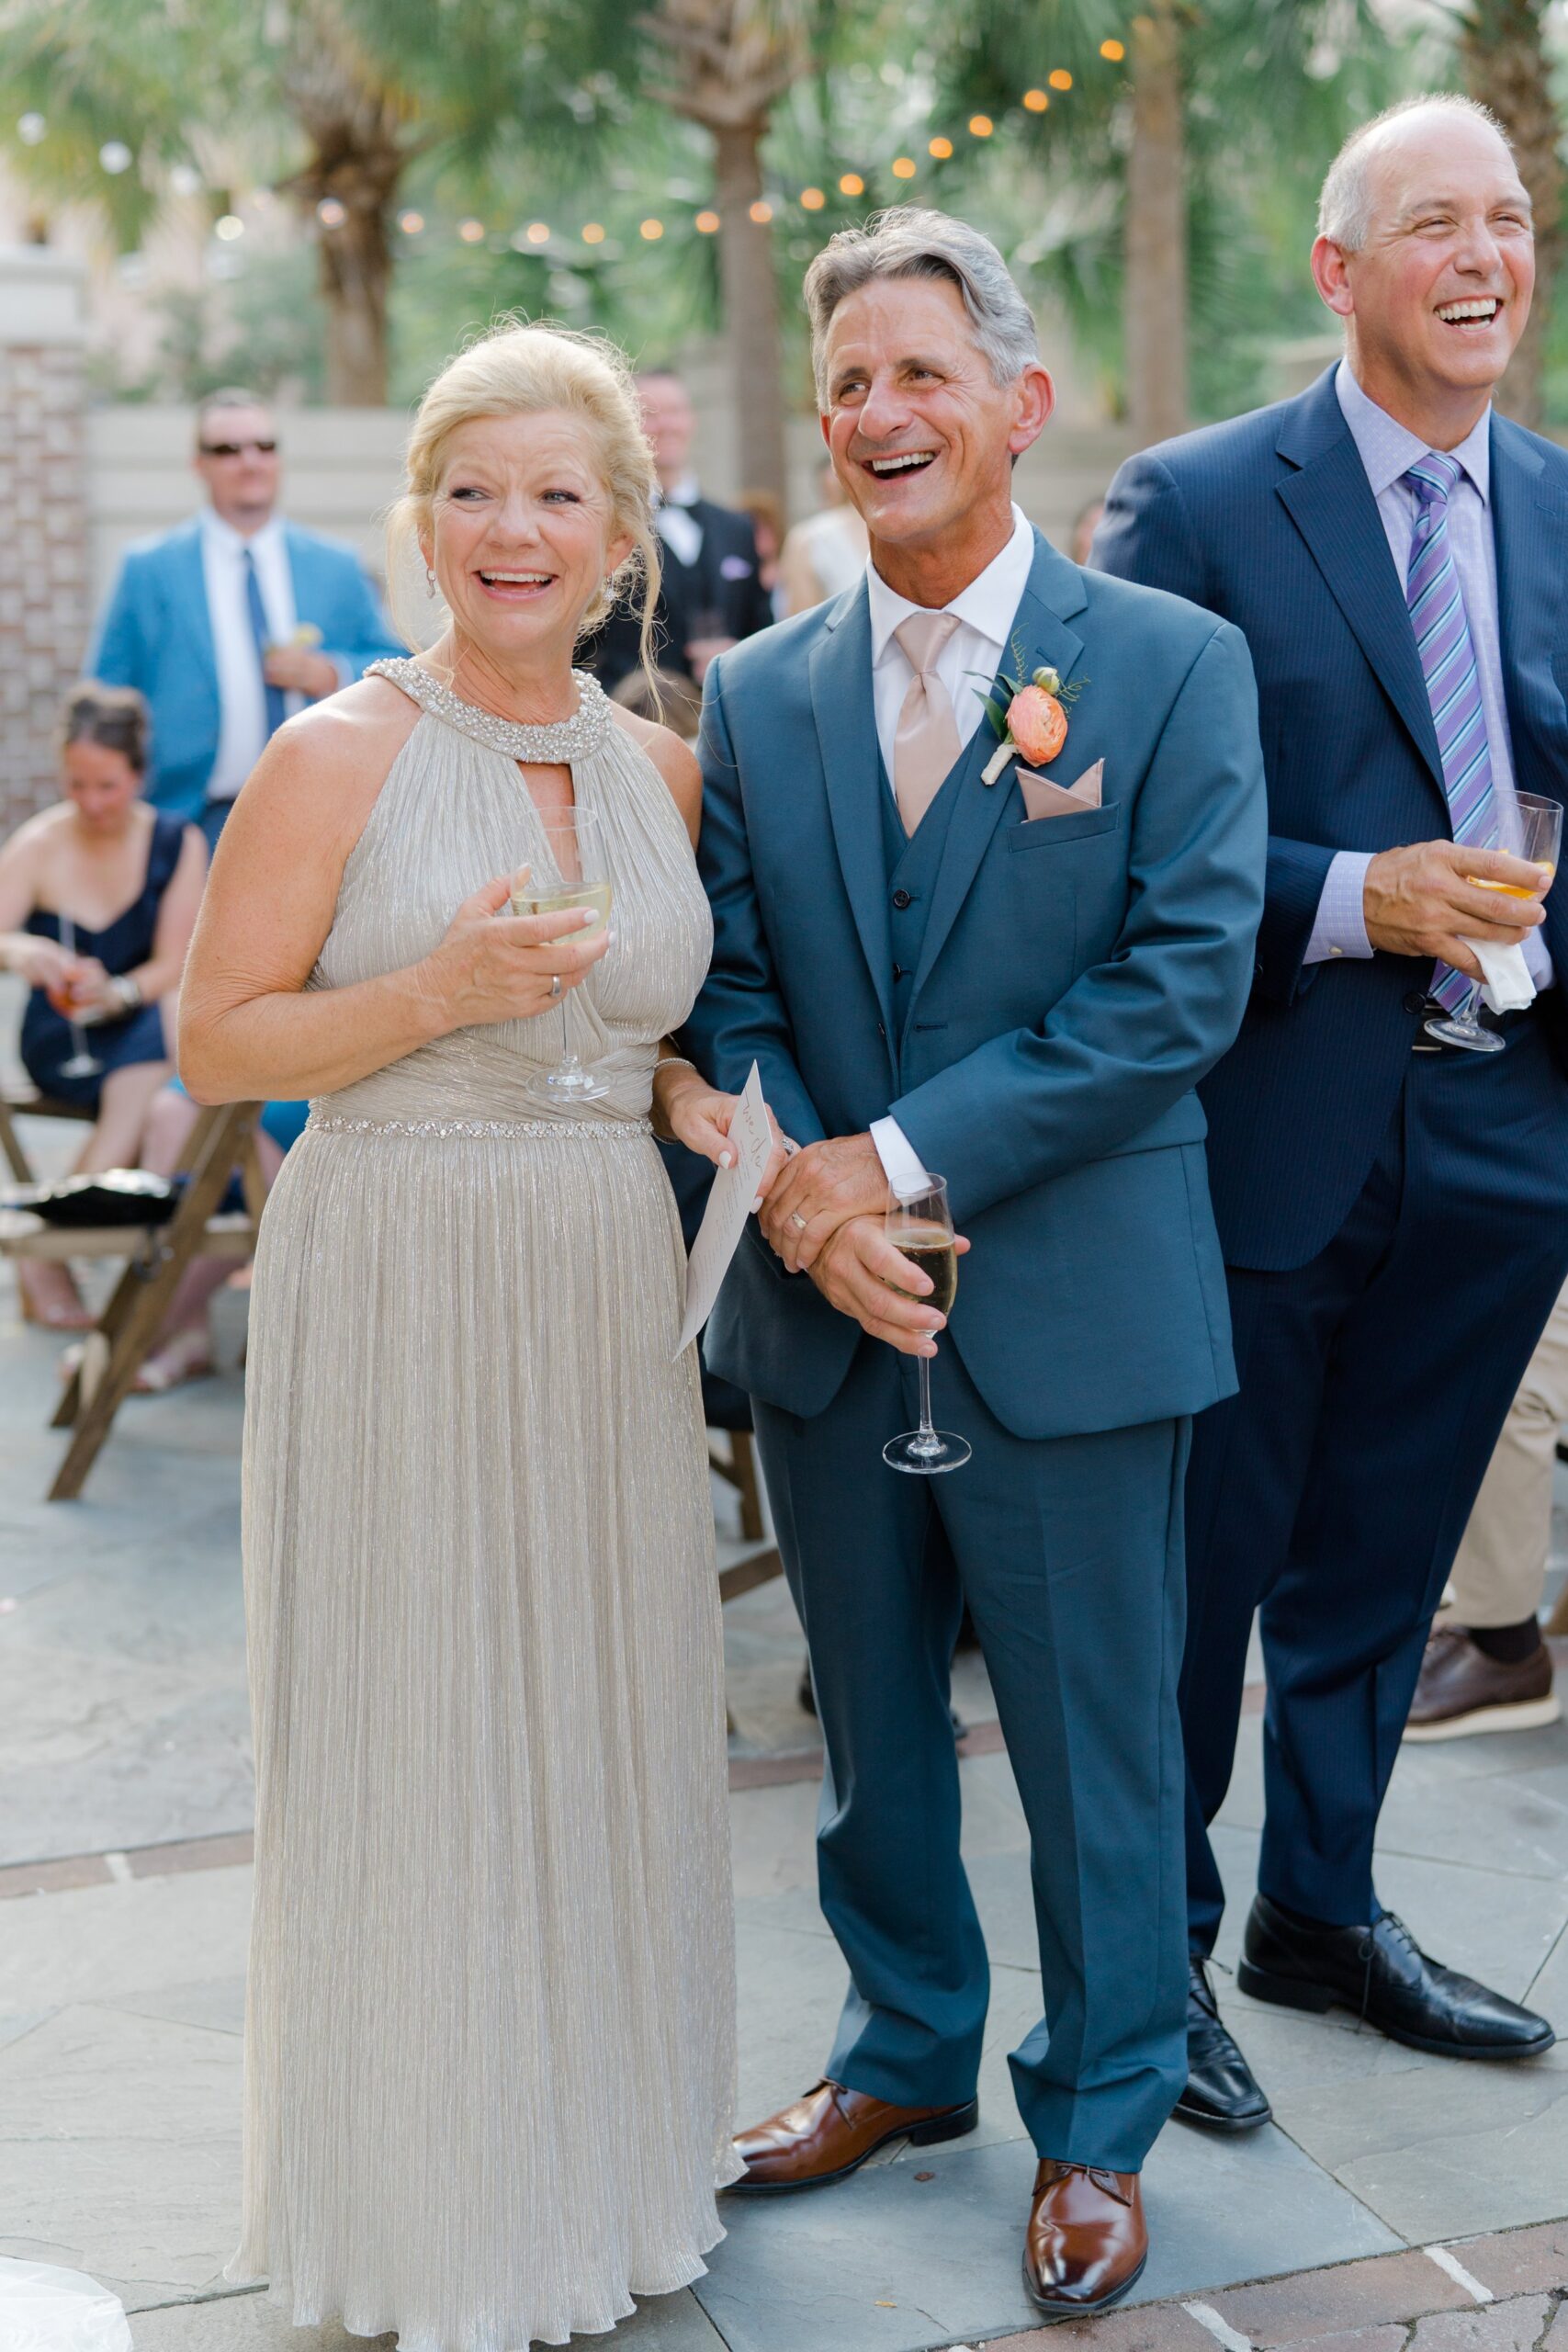 Parents of the groom laugh during wedding reception.